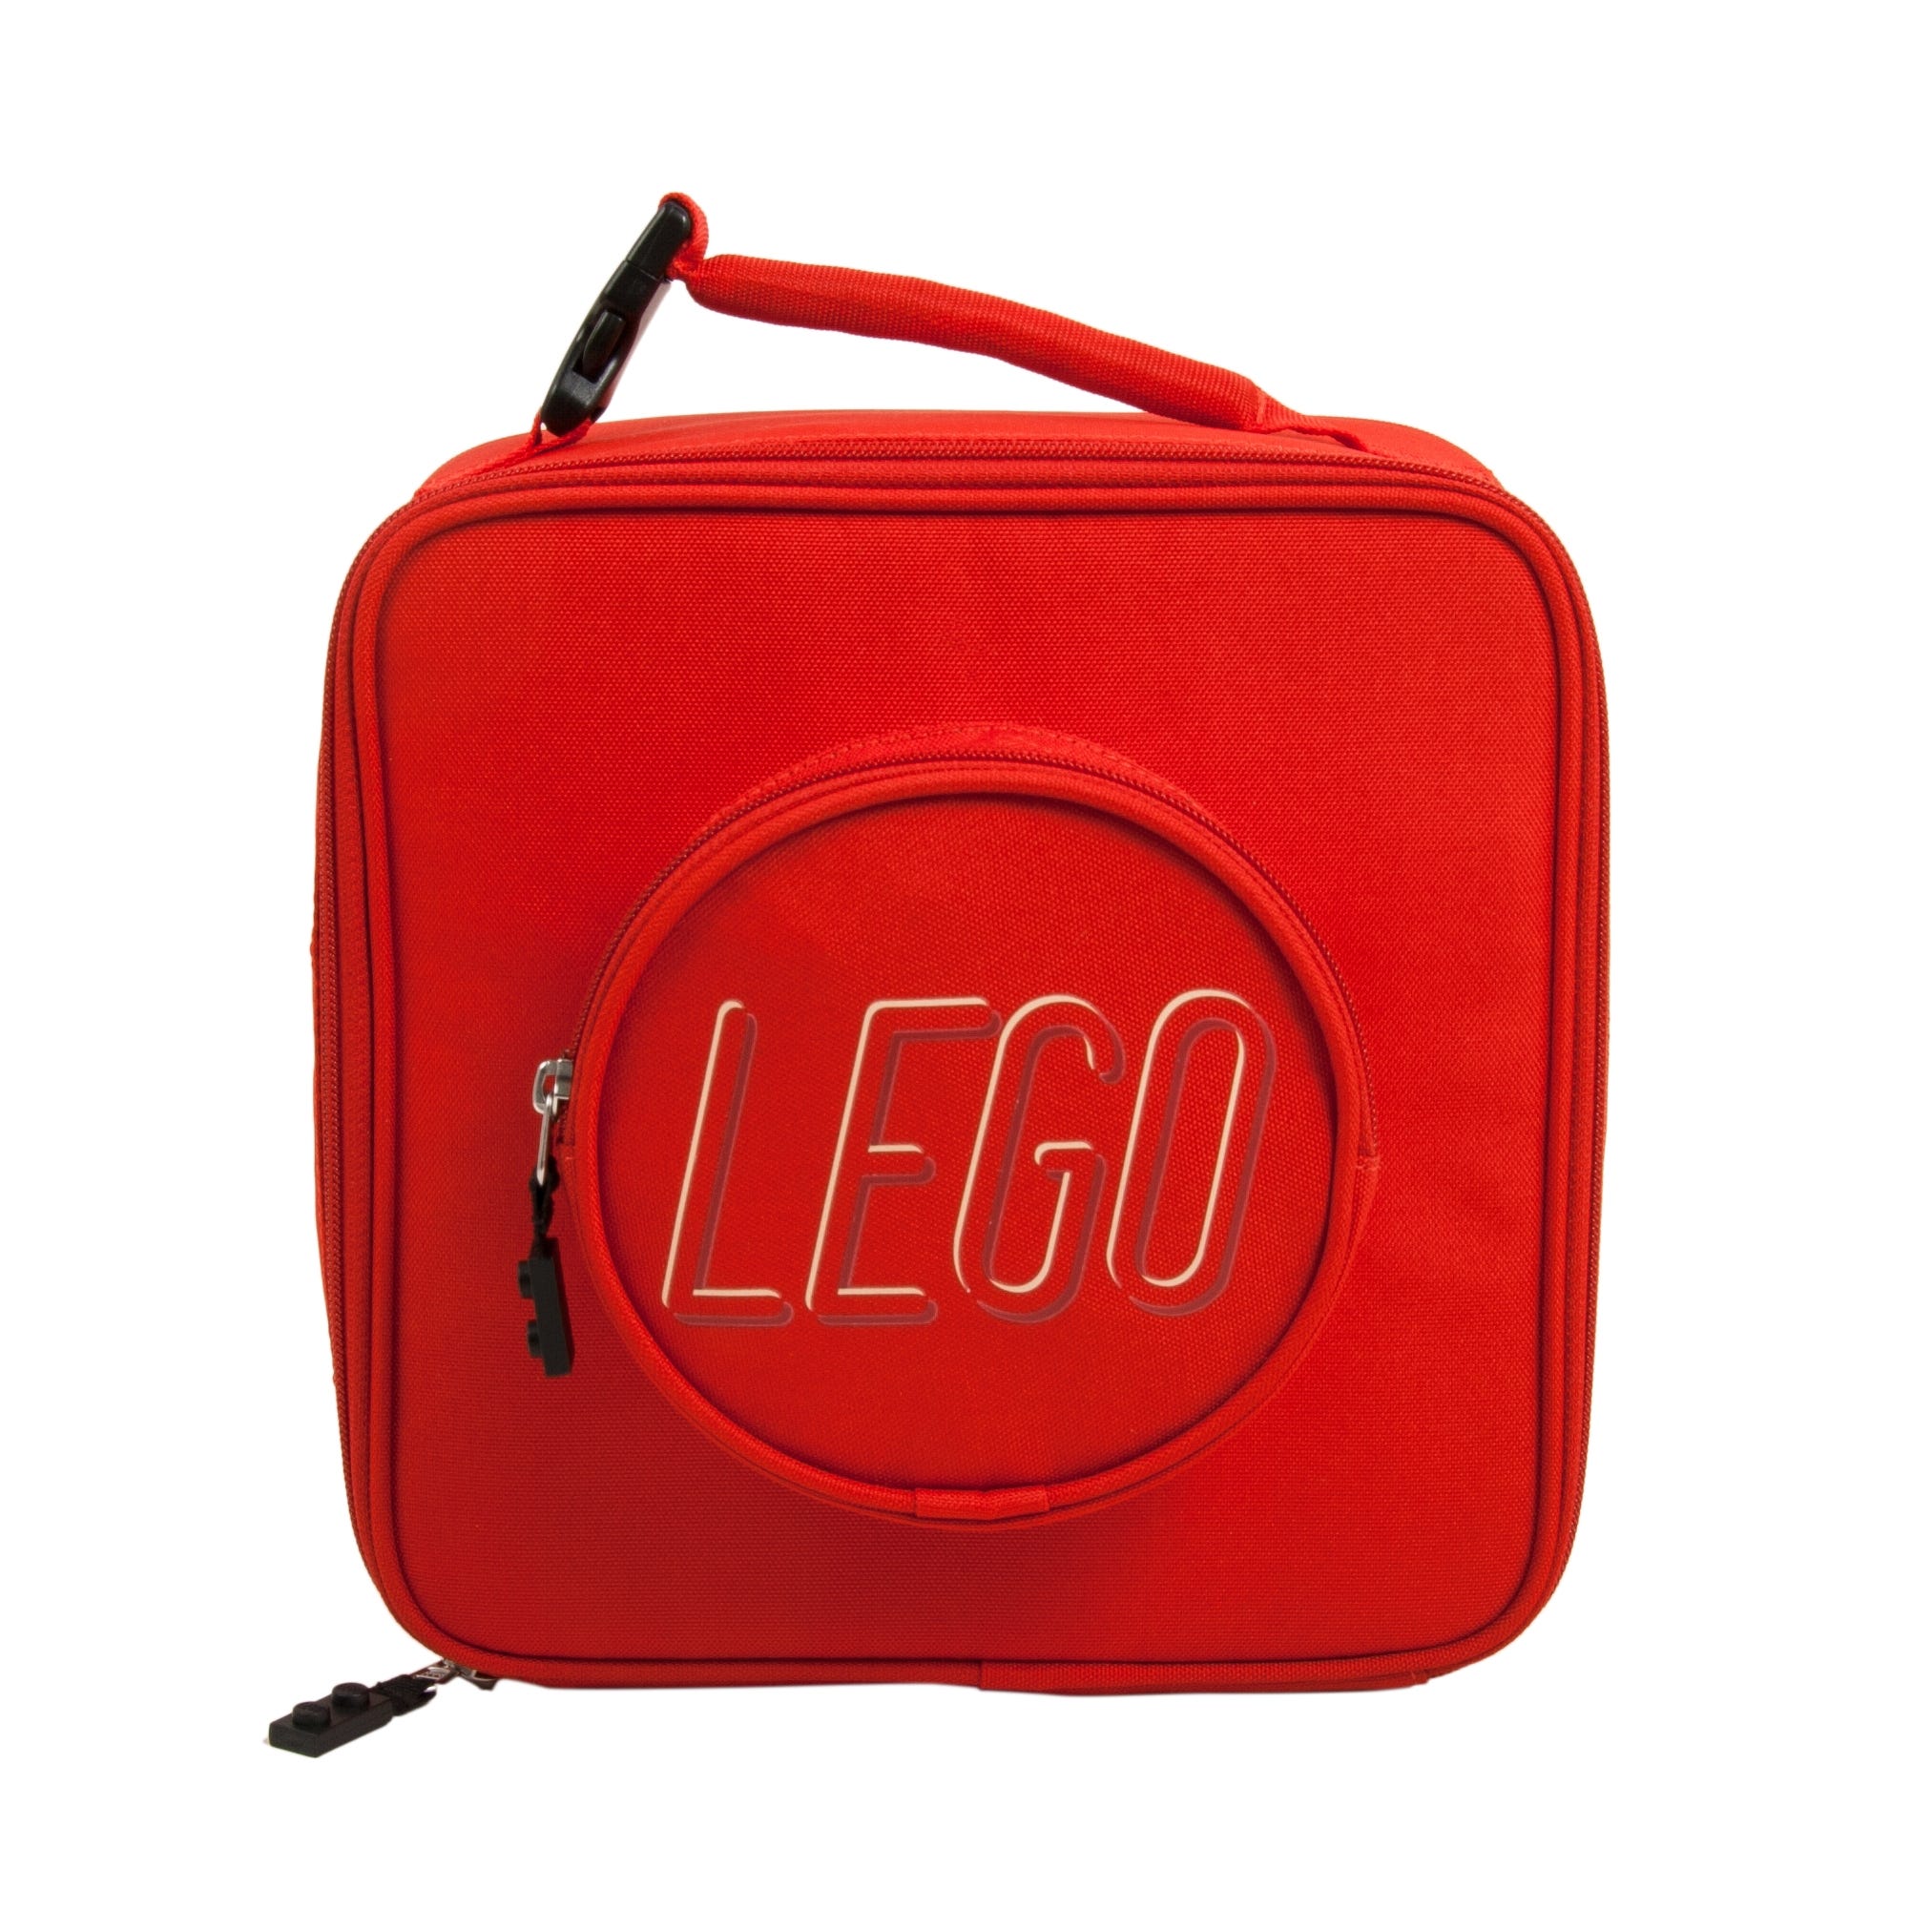 LEGO Brick Lunch Bag Red